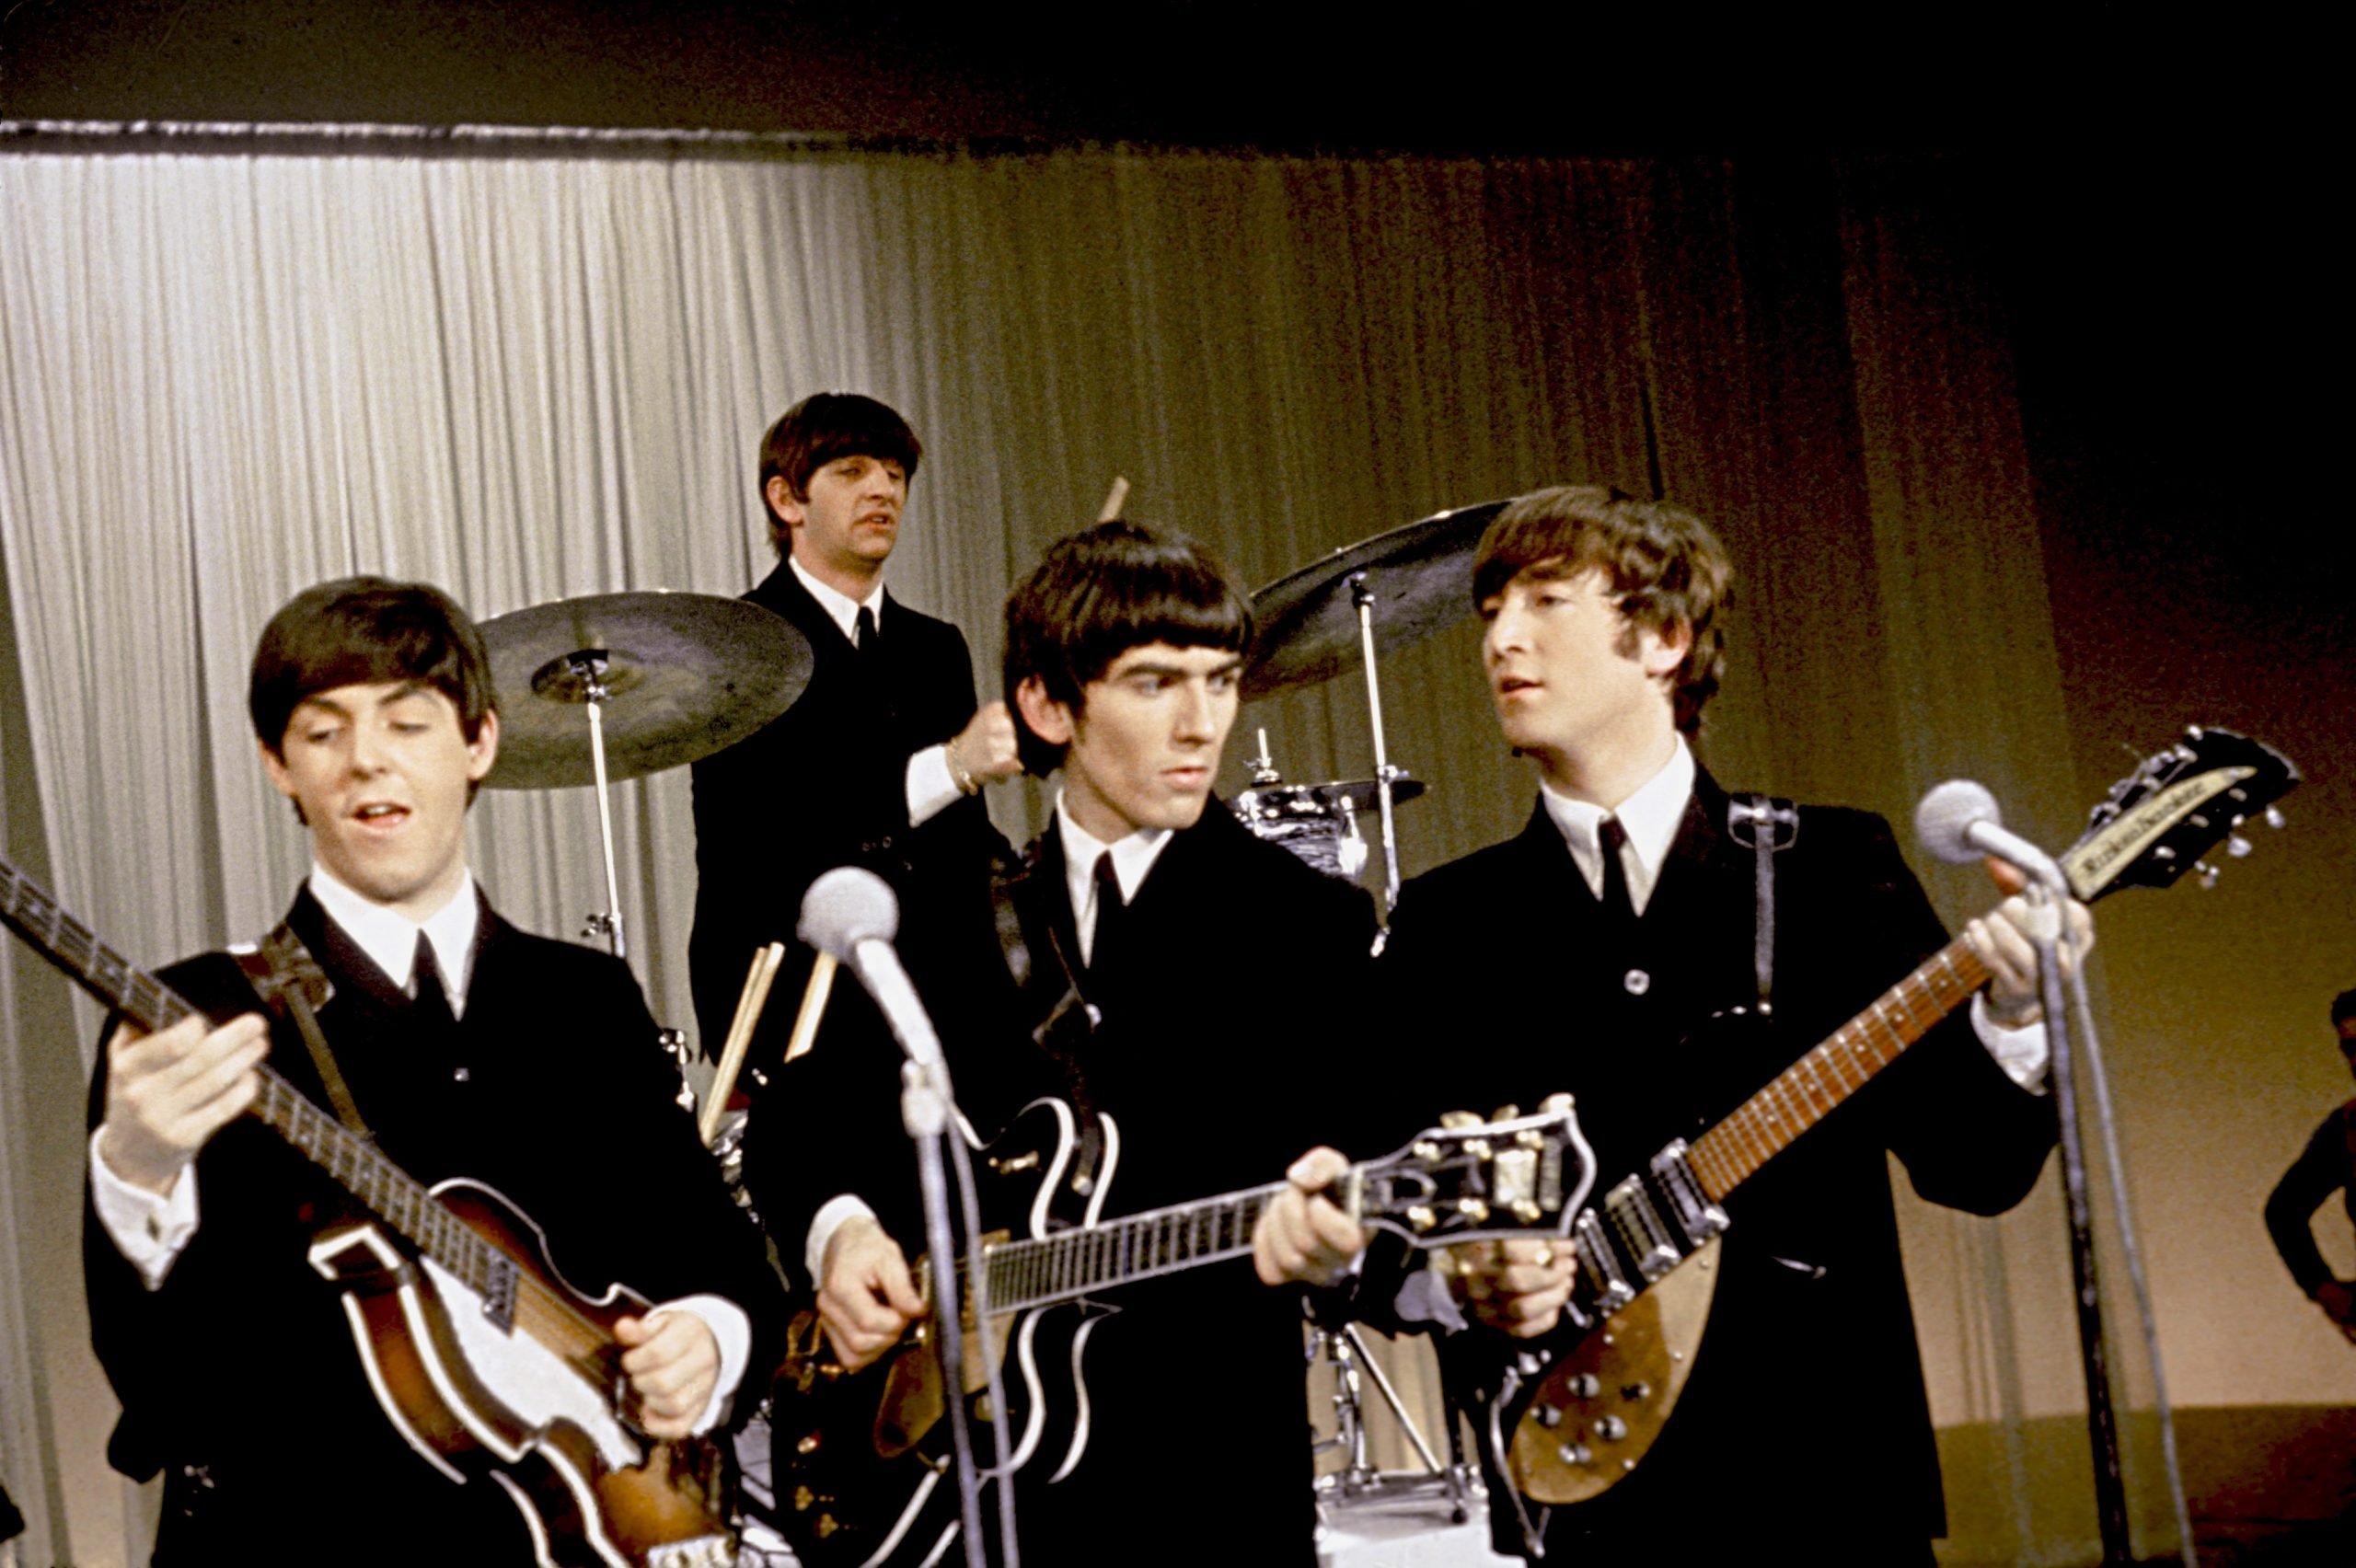 Rock and roll band 'The Beatles' perform in a still from their movie 'A Hard Day's Night,' Paul McCartney, Ringo Starr, George Harrison, and John Lennon